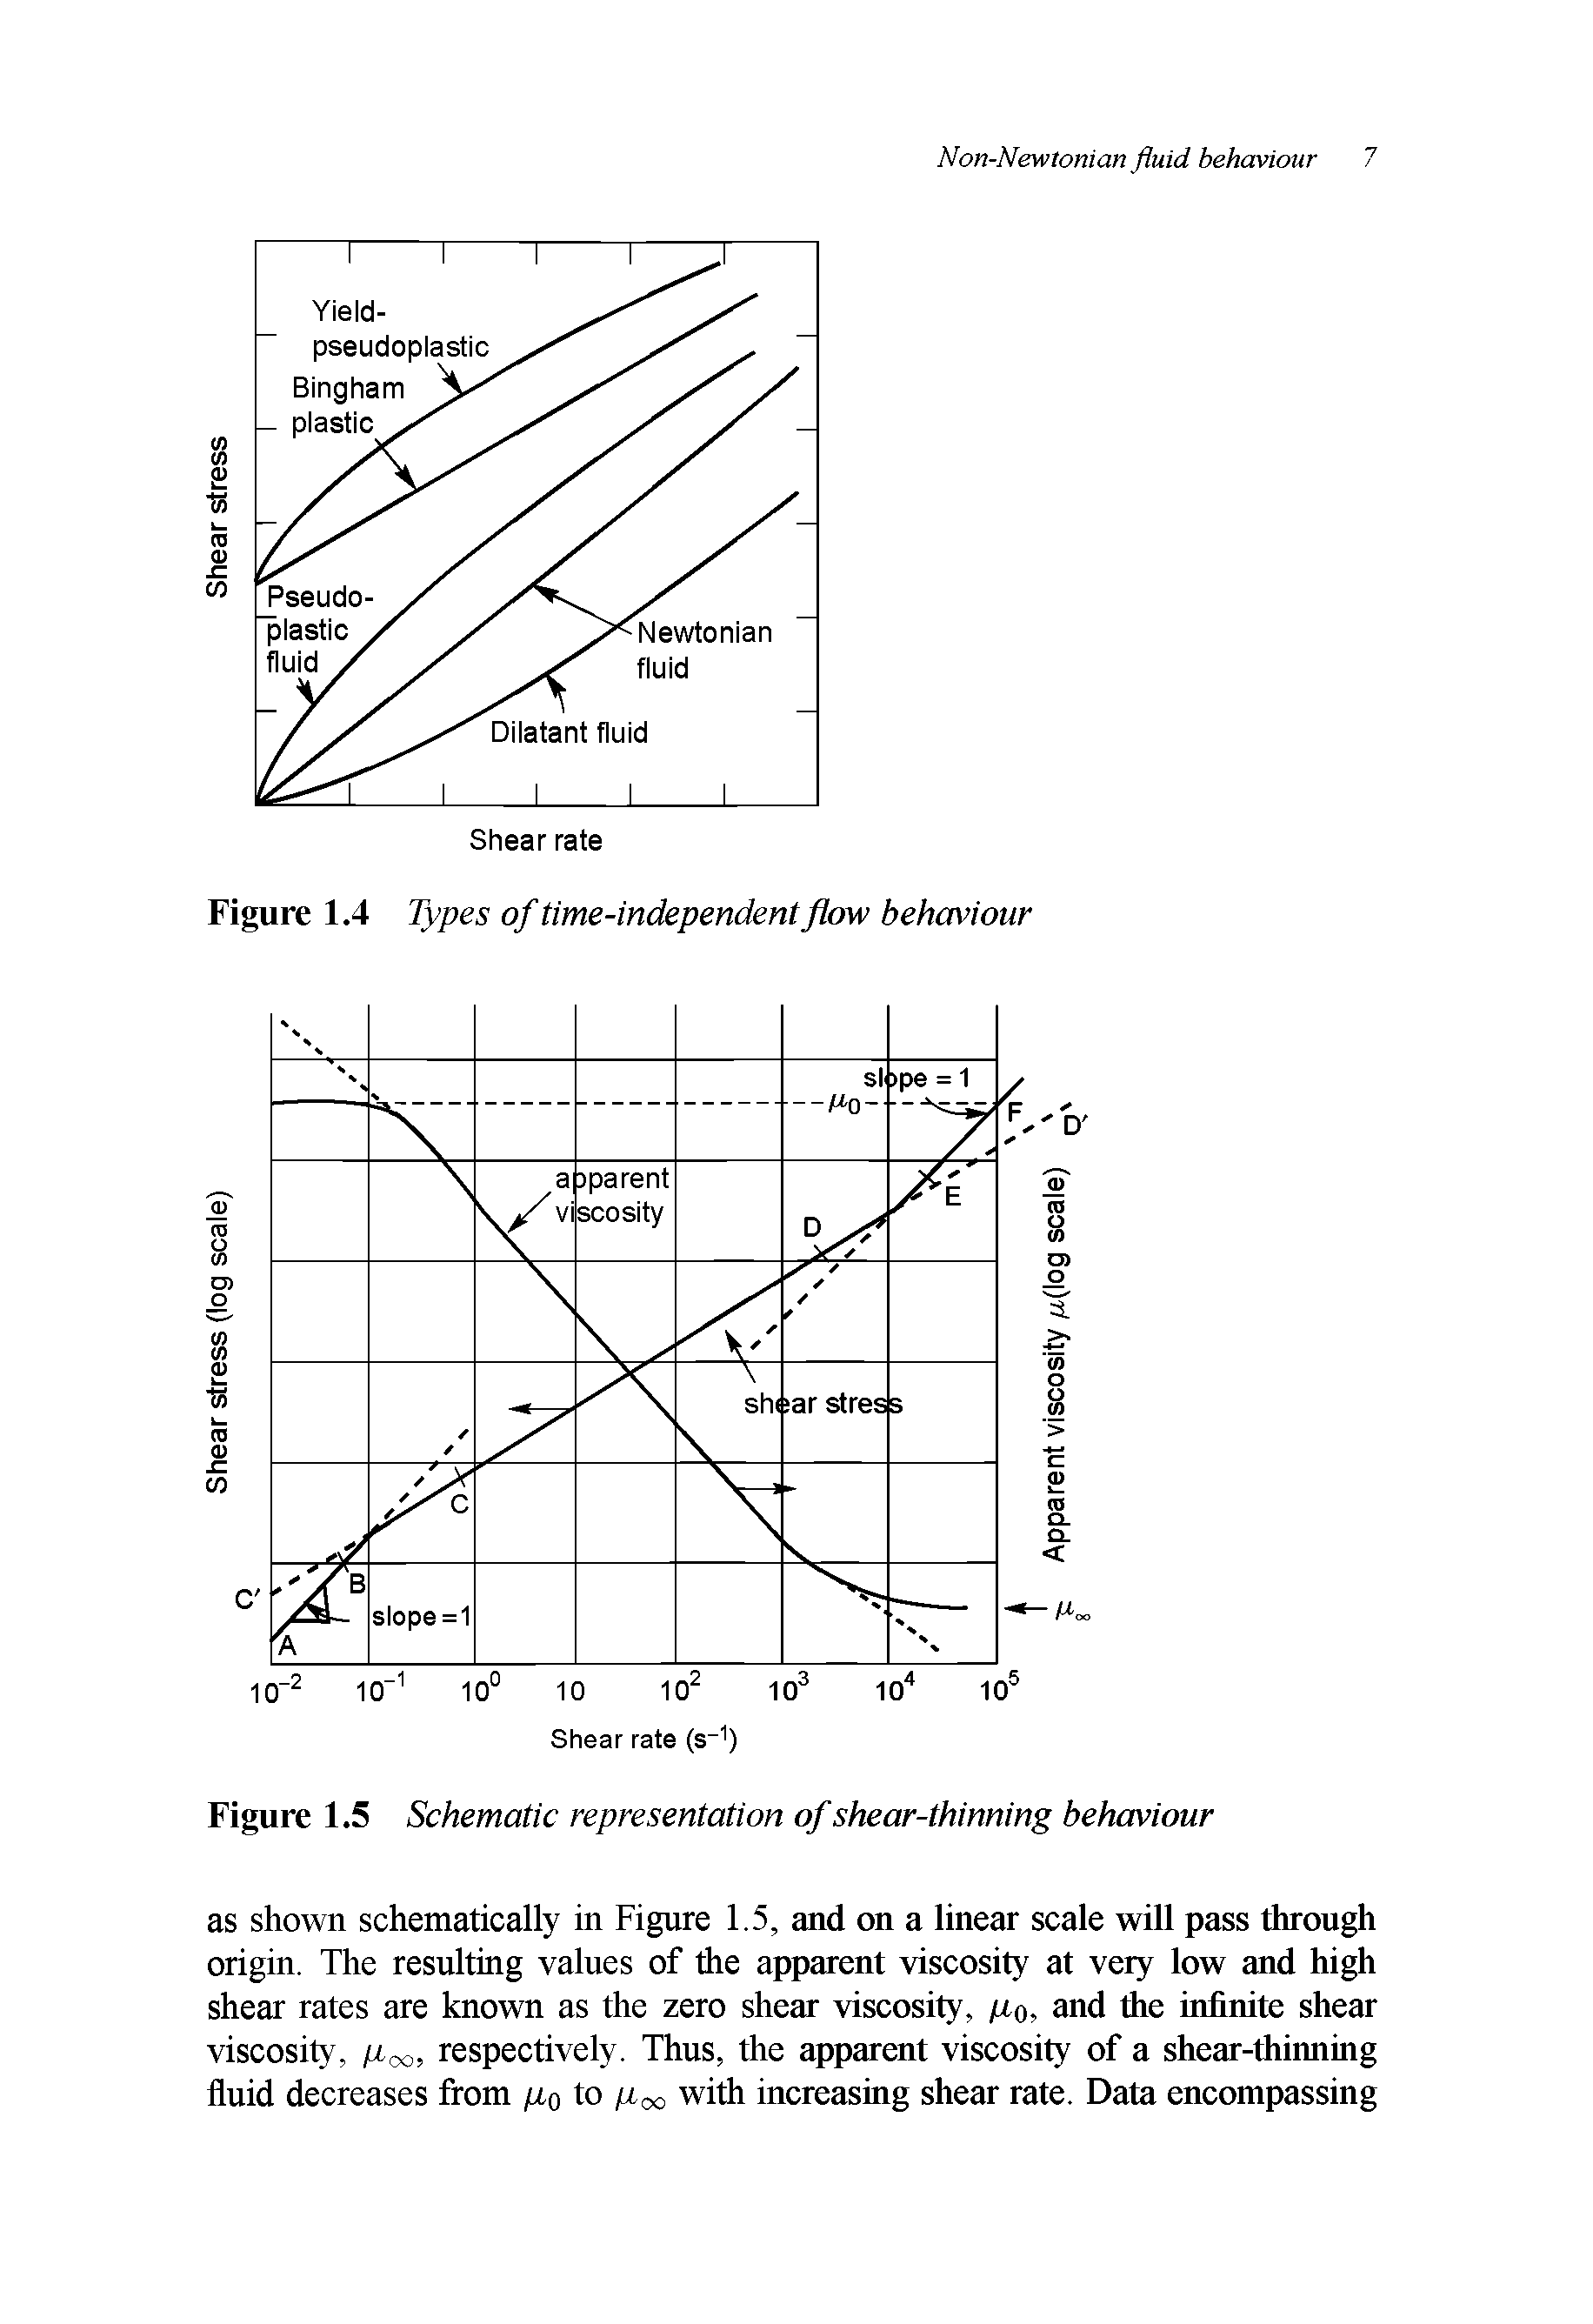 Figure 1.4 Types of time-independent flow behaviour...